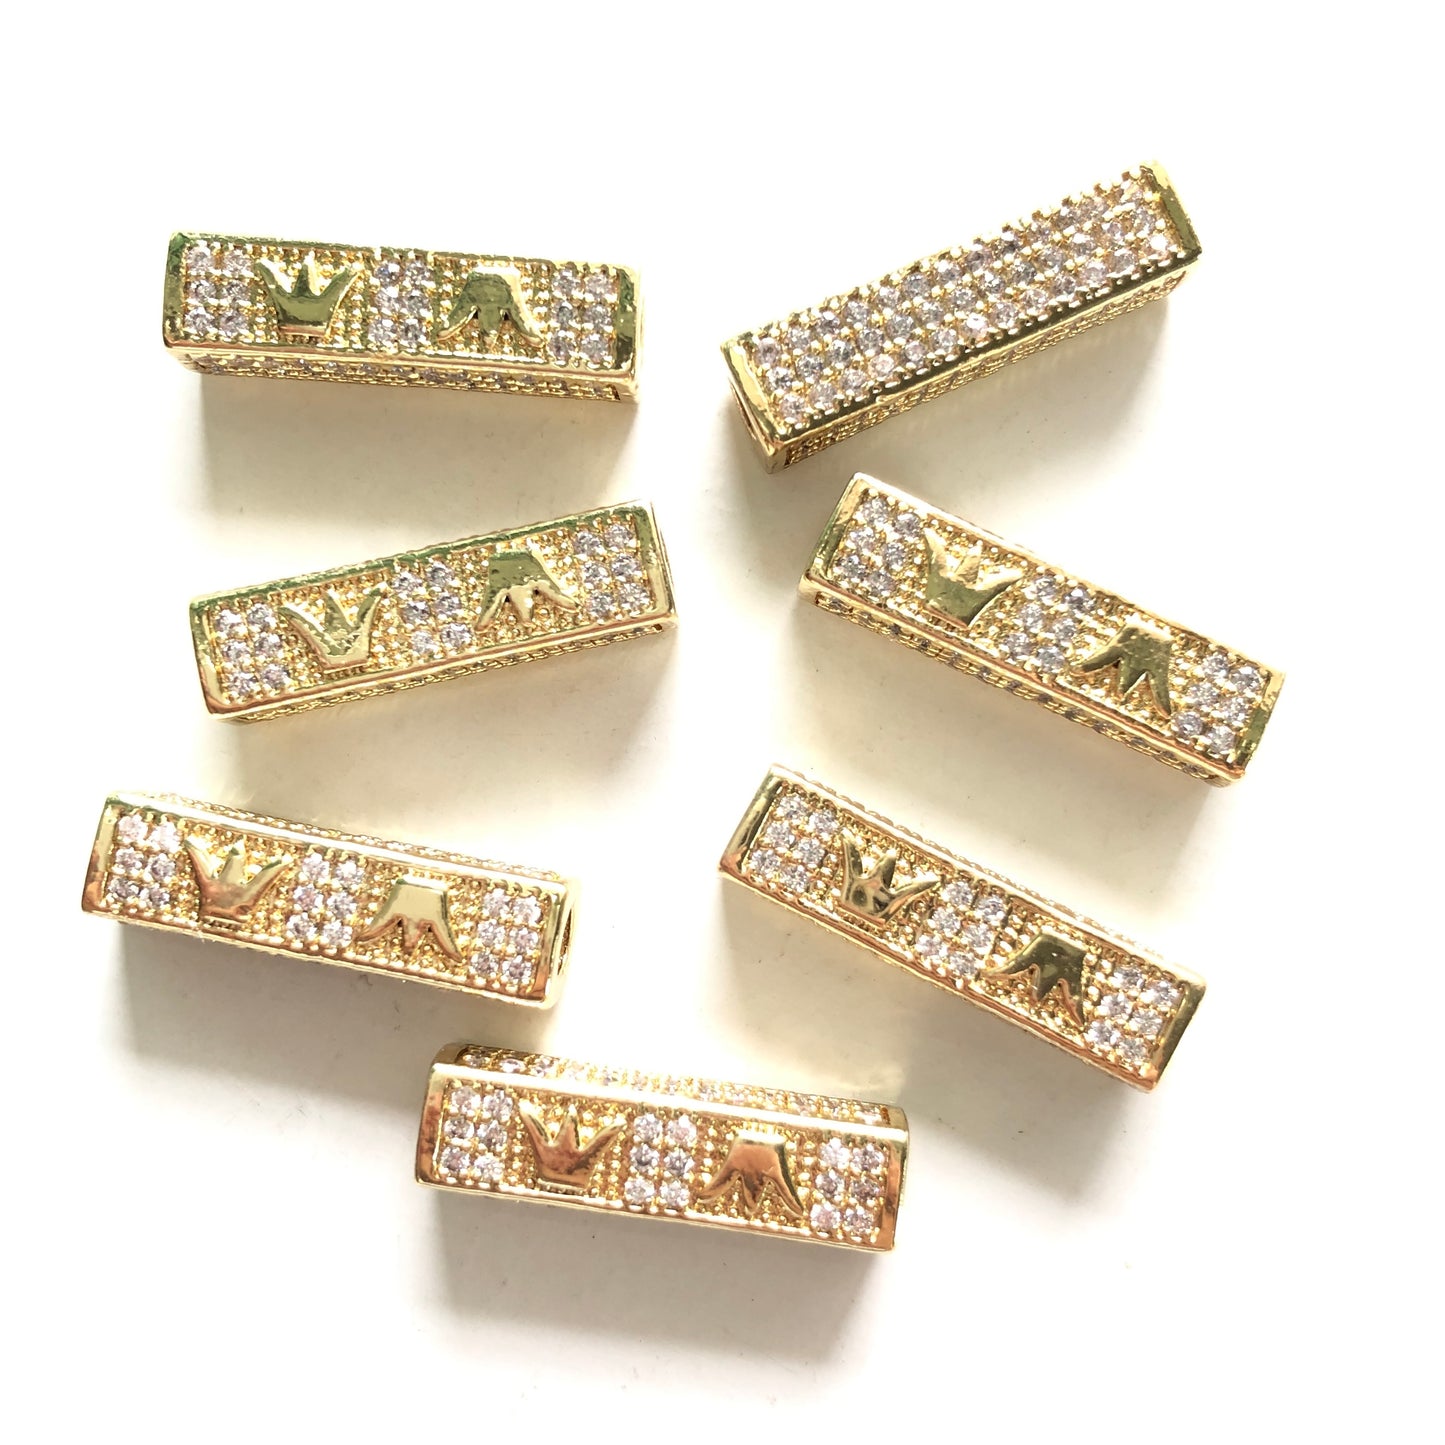 10-20pcs/lot 21*6mm CZ Paved Crown Centerpiece Spacers Gold CZ Paved Spacers Cuboid Spacers Charms Beads Beyond